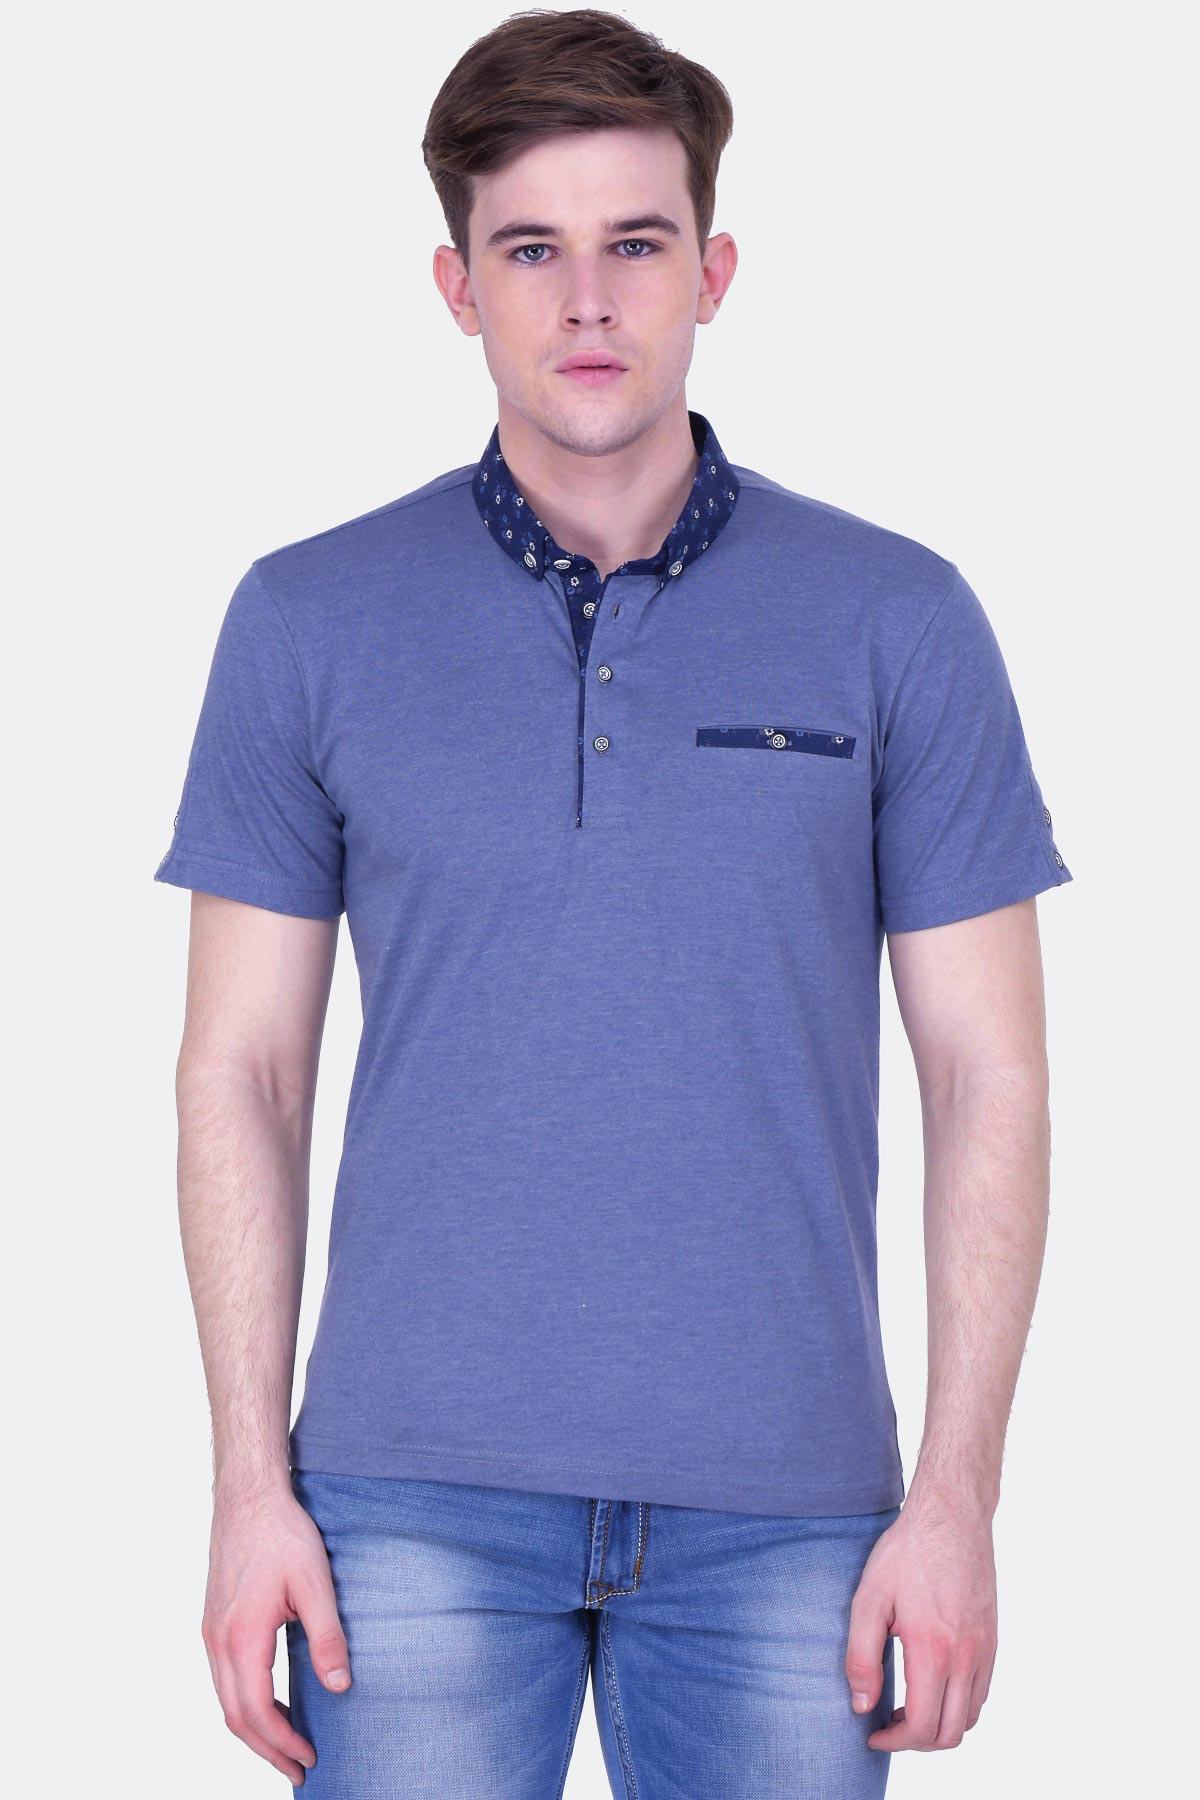 Jersy Polo with Print Details - Quontico